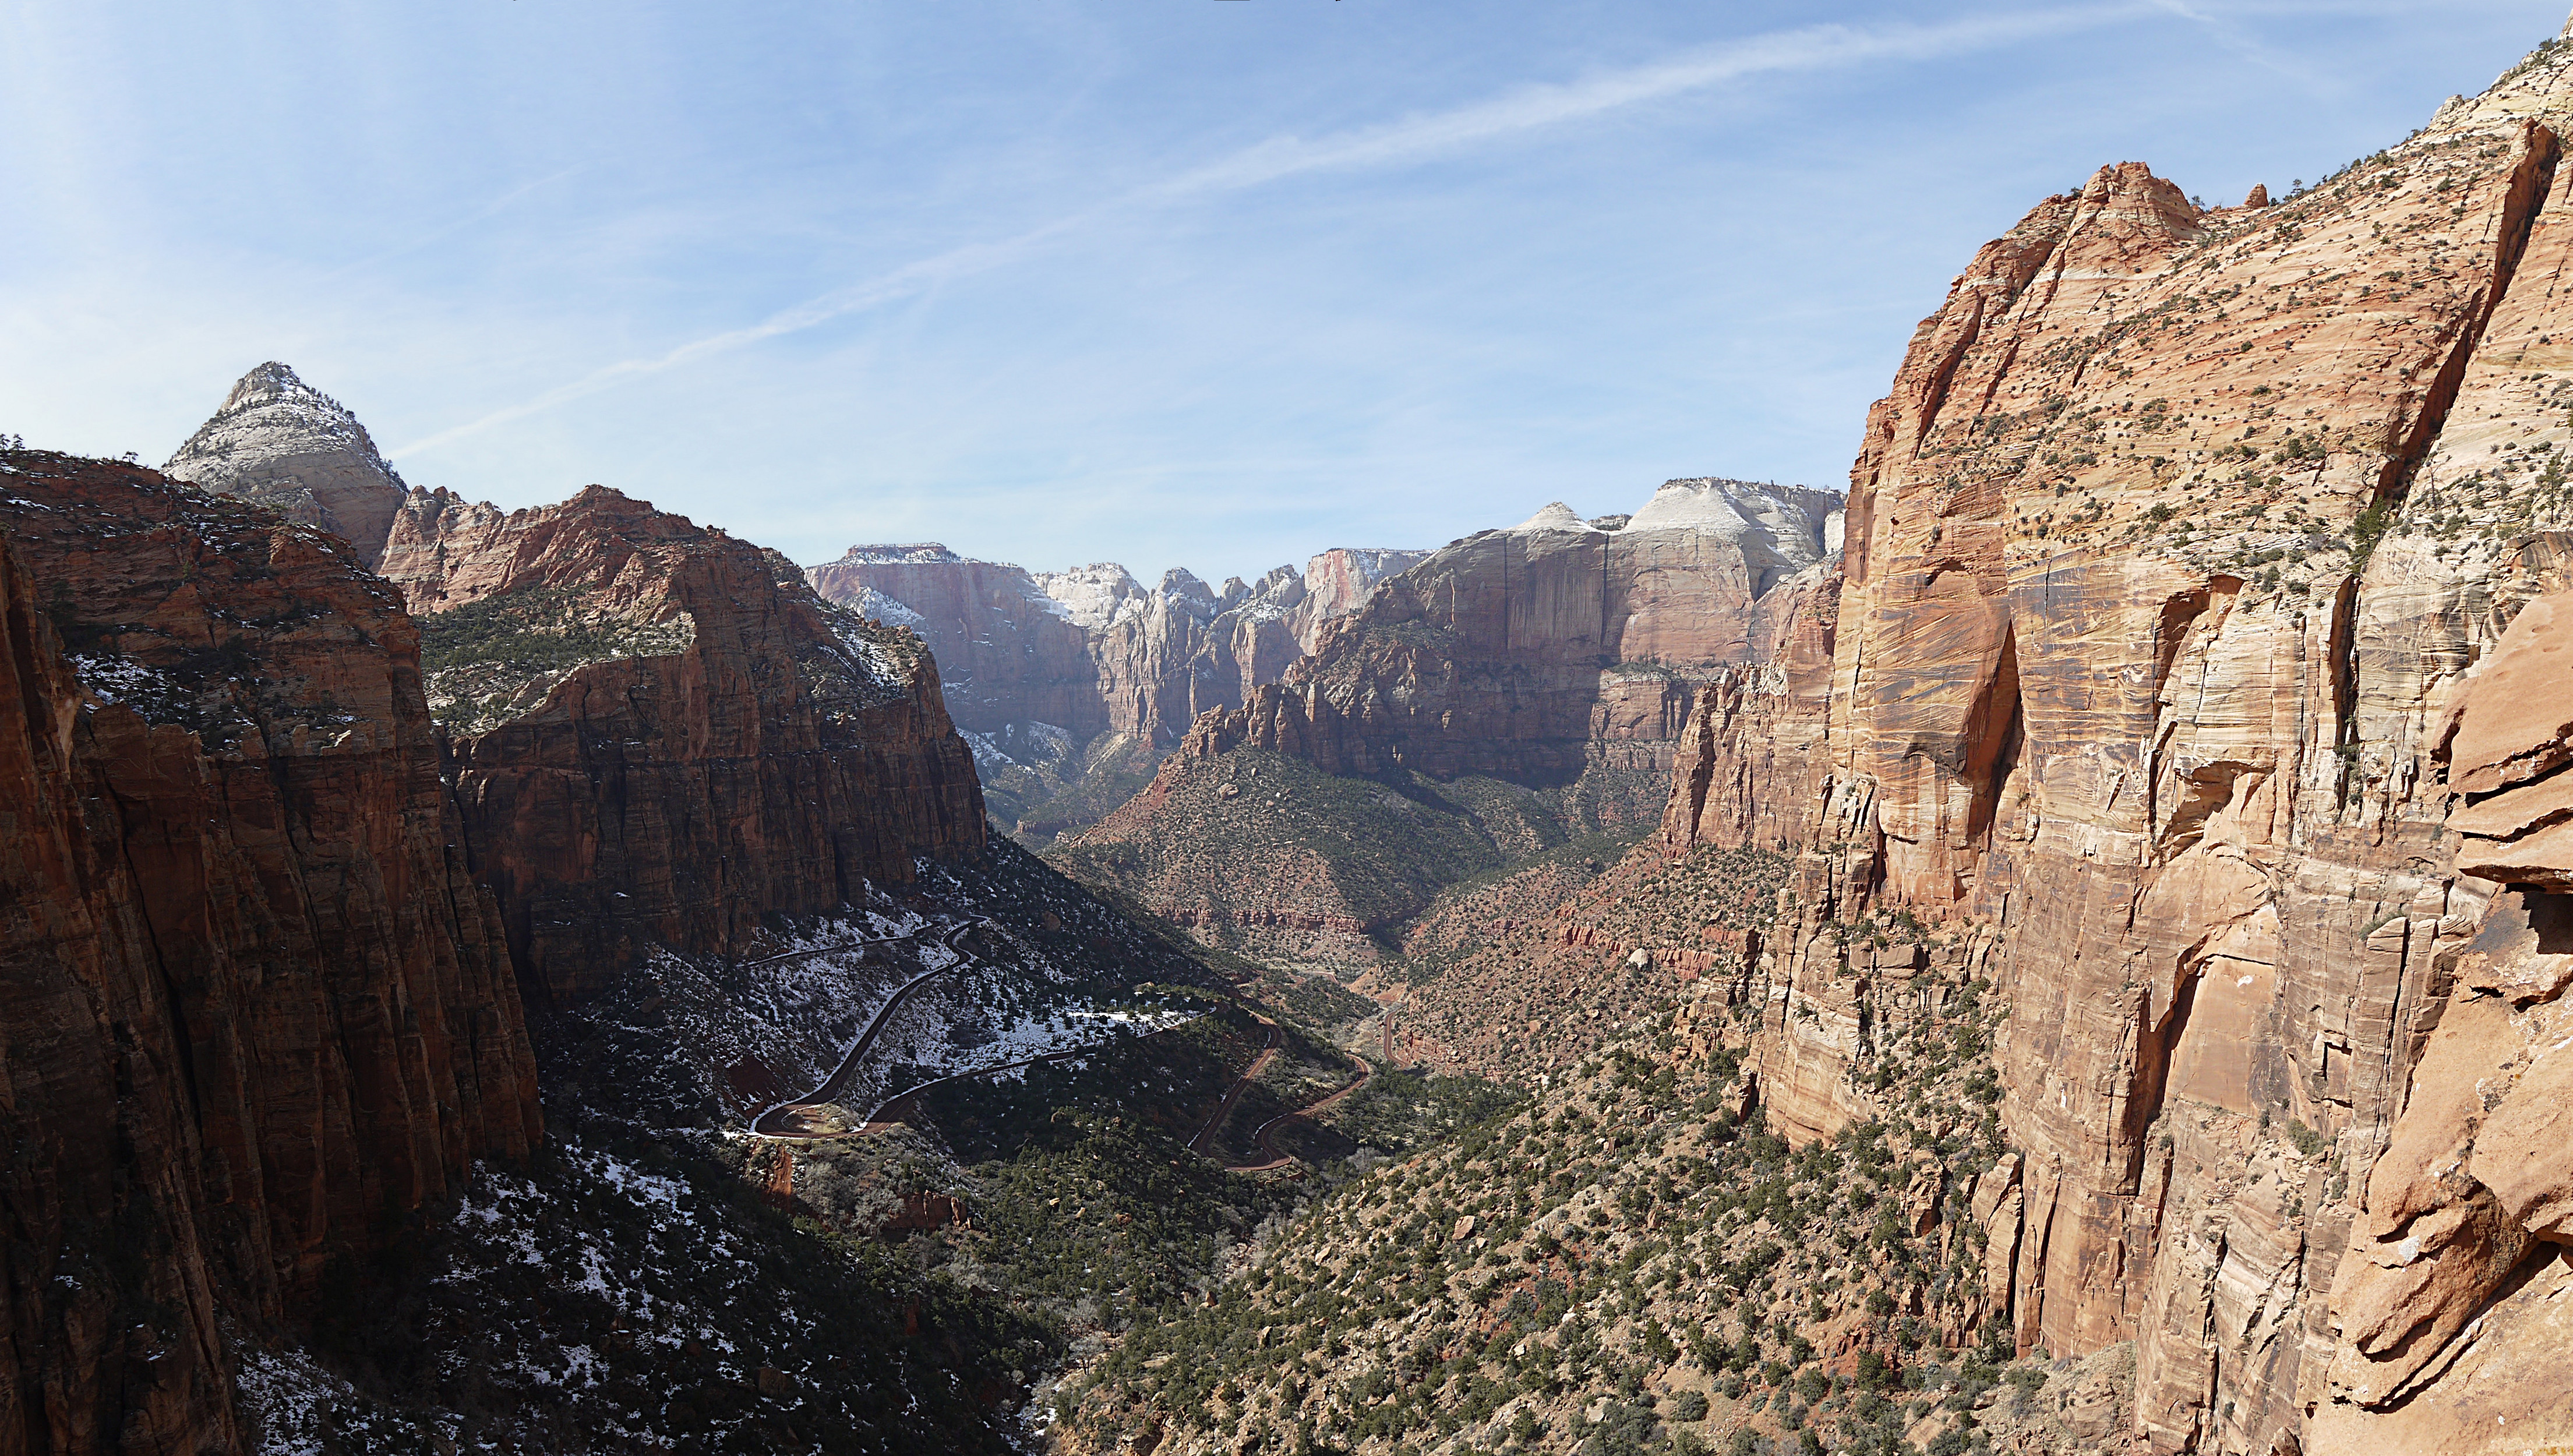 Overlook trail view - Zion Canyon